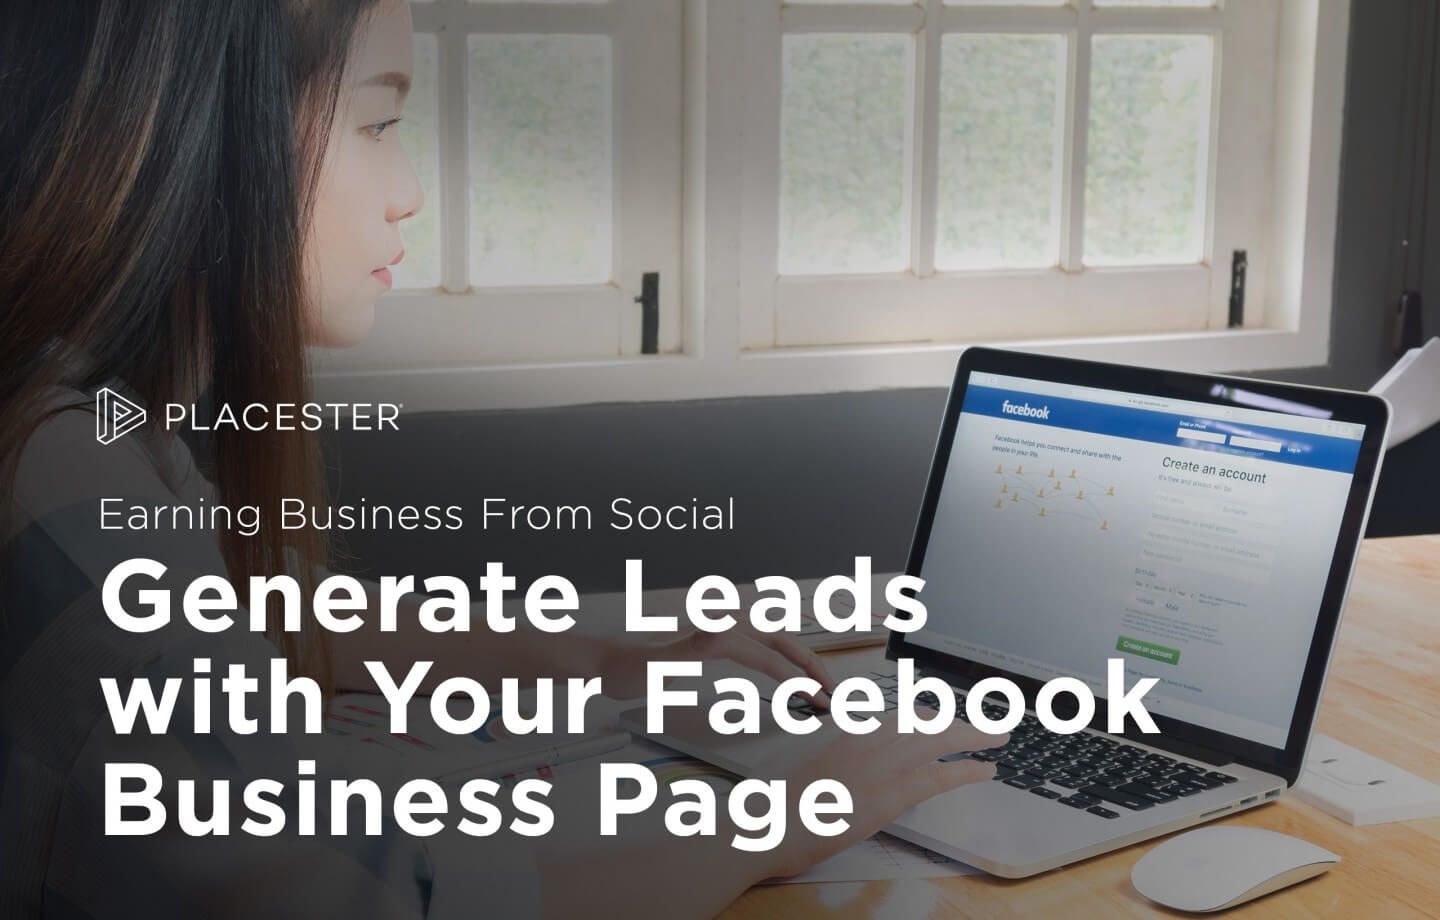 Generate Real Estate Leads from Your Facebook Business Page